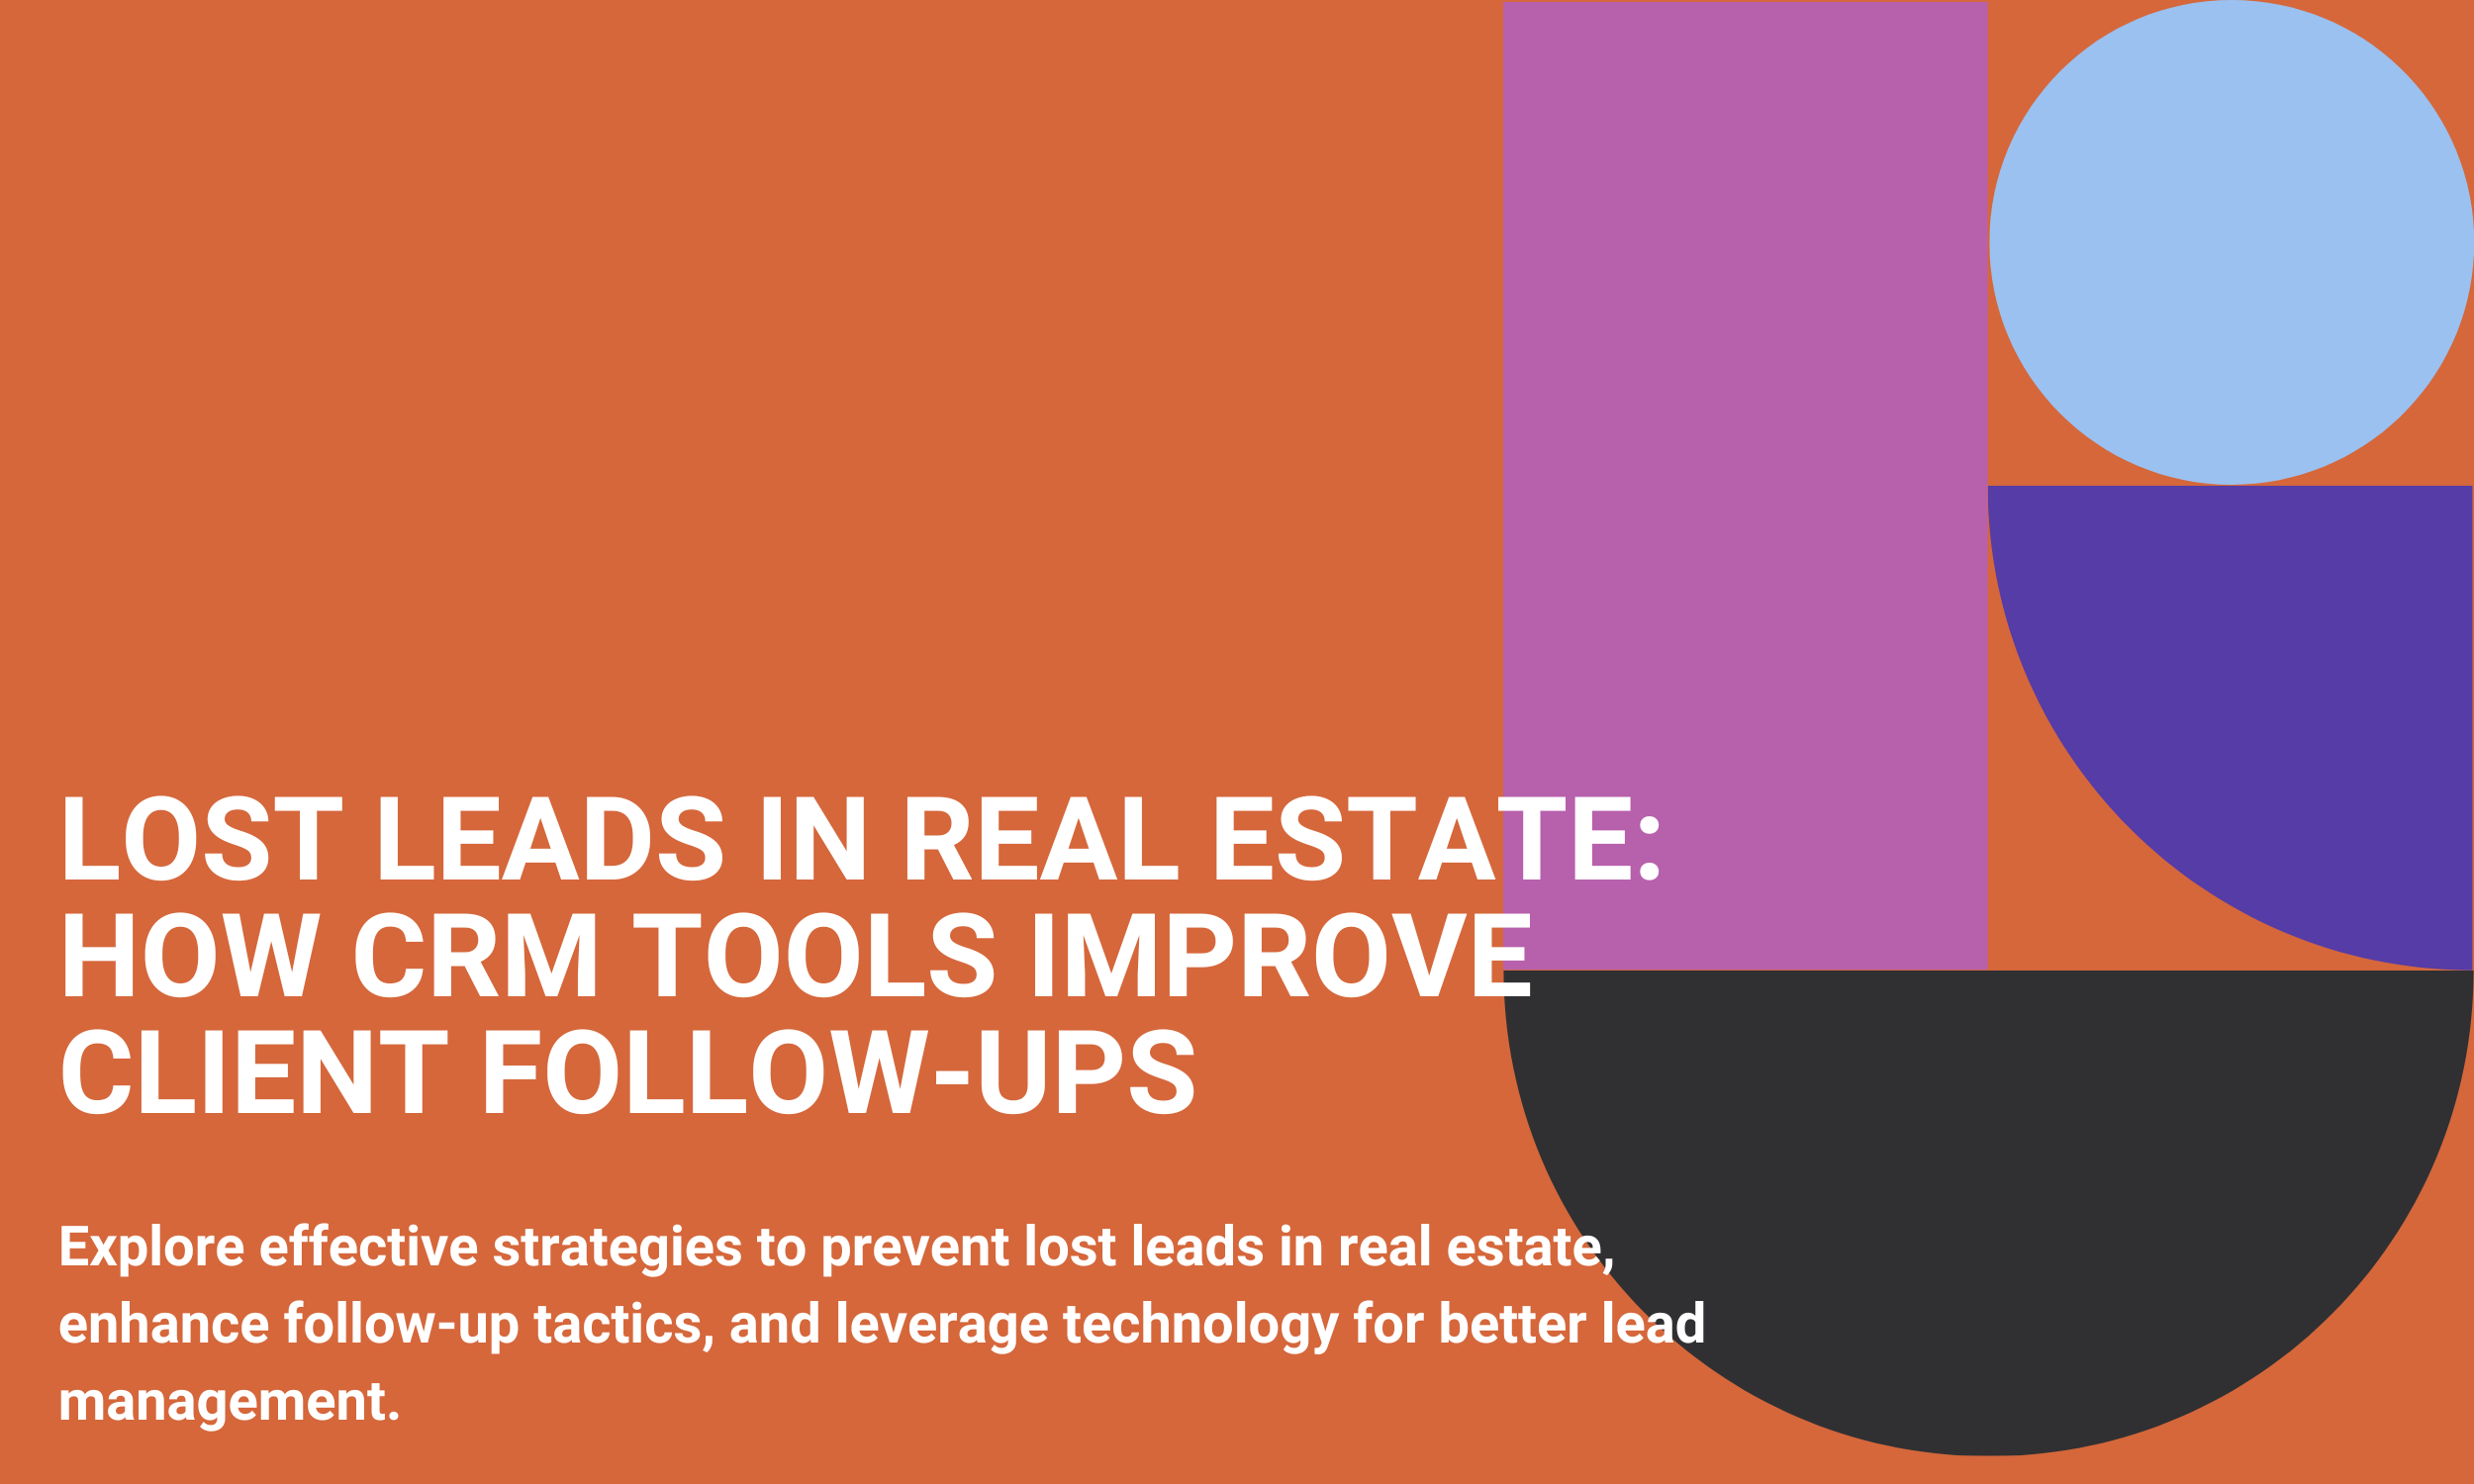 Lost Leads in Real Estate: How CRM Tools Improve Client Follow-Ups